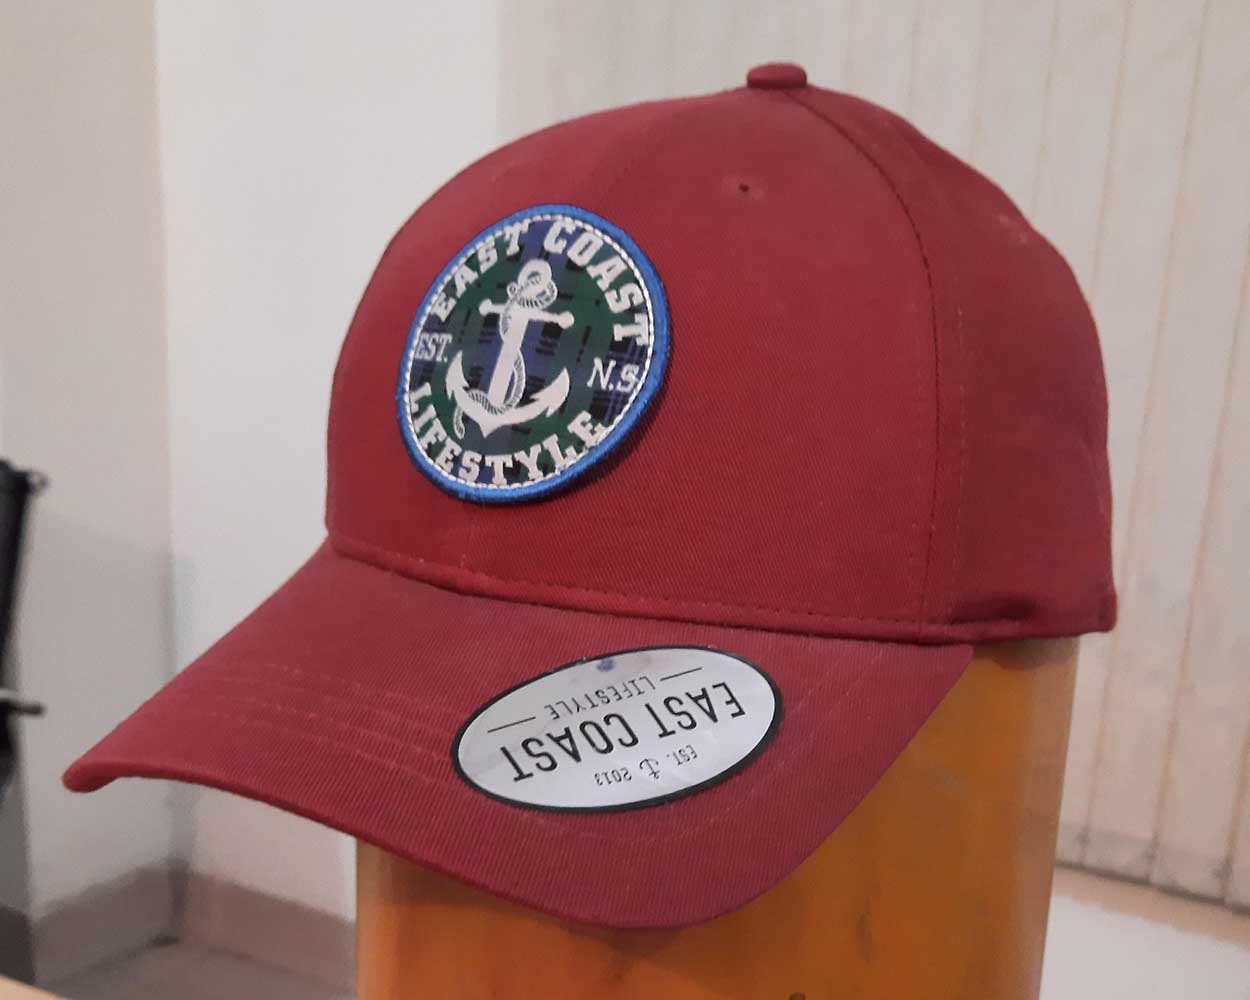 Fitted cap manufacturer in Bangladesh